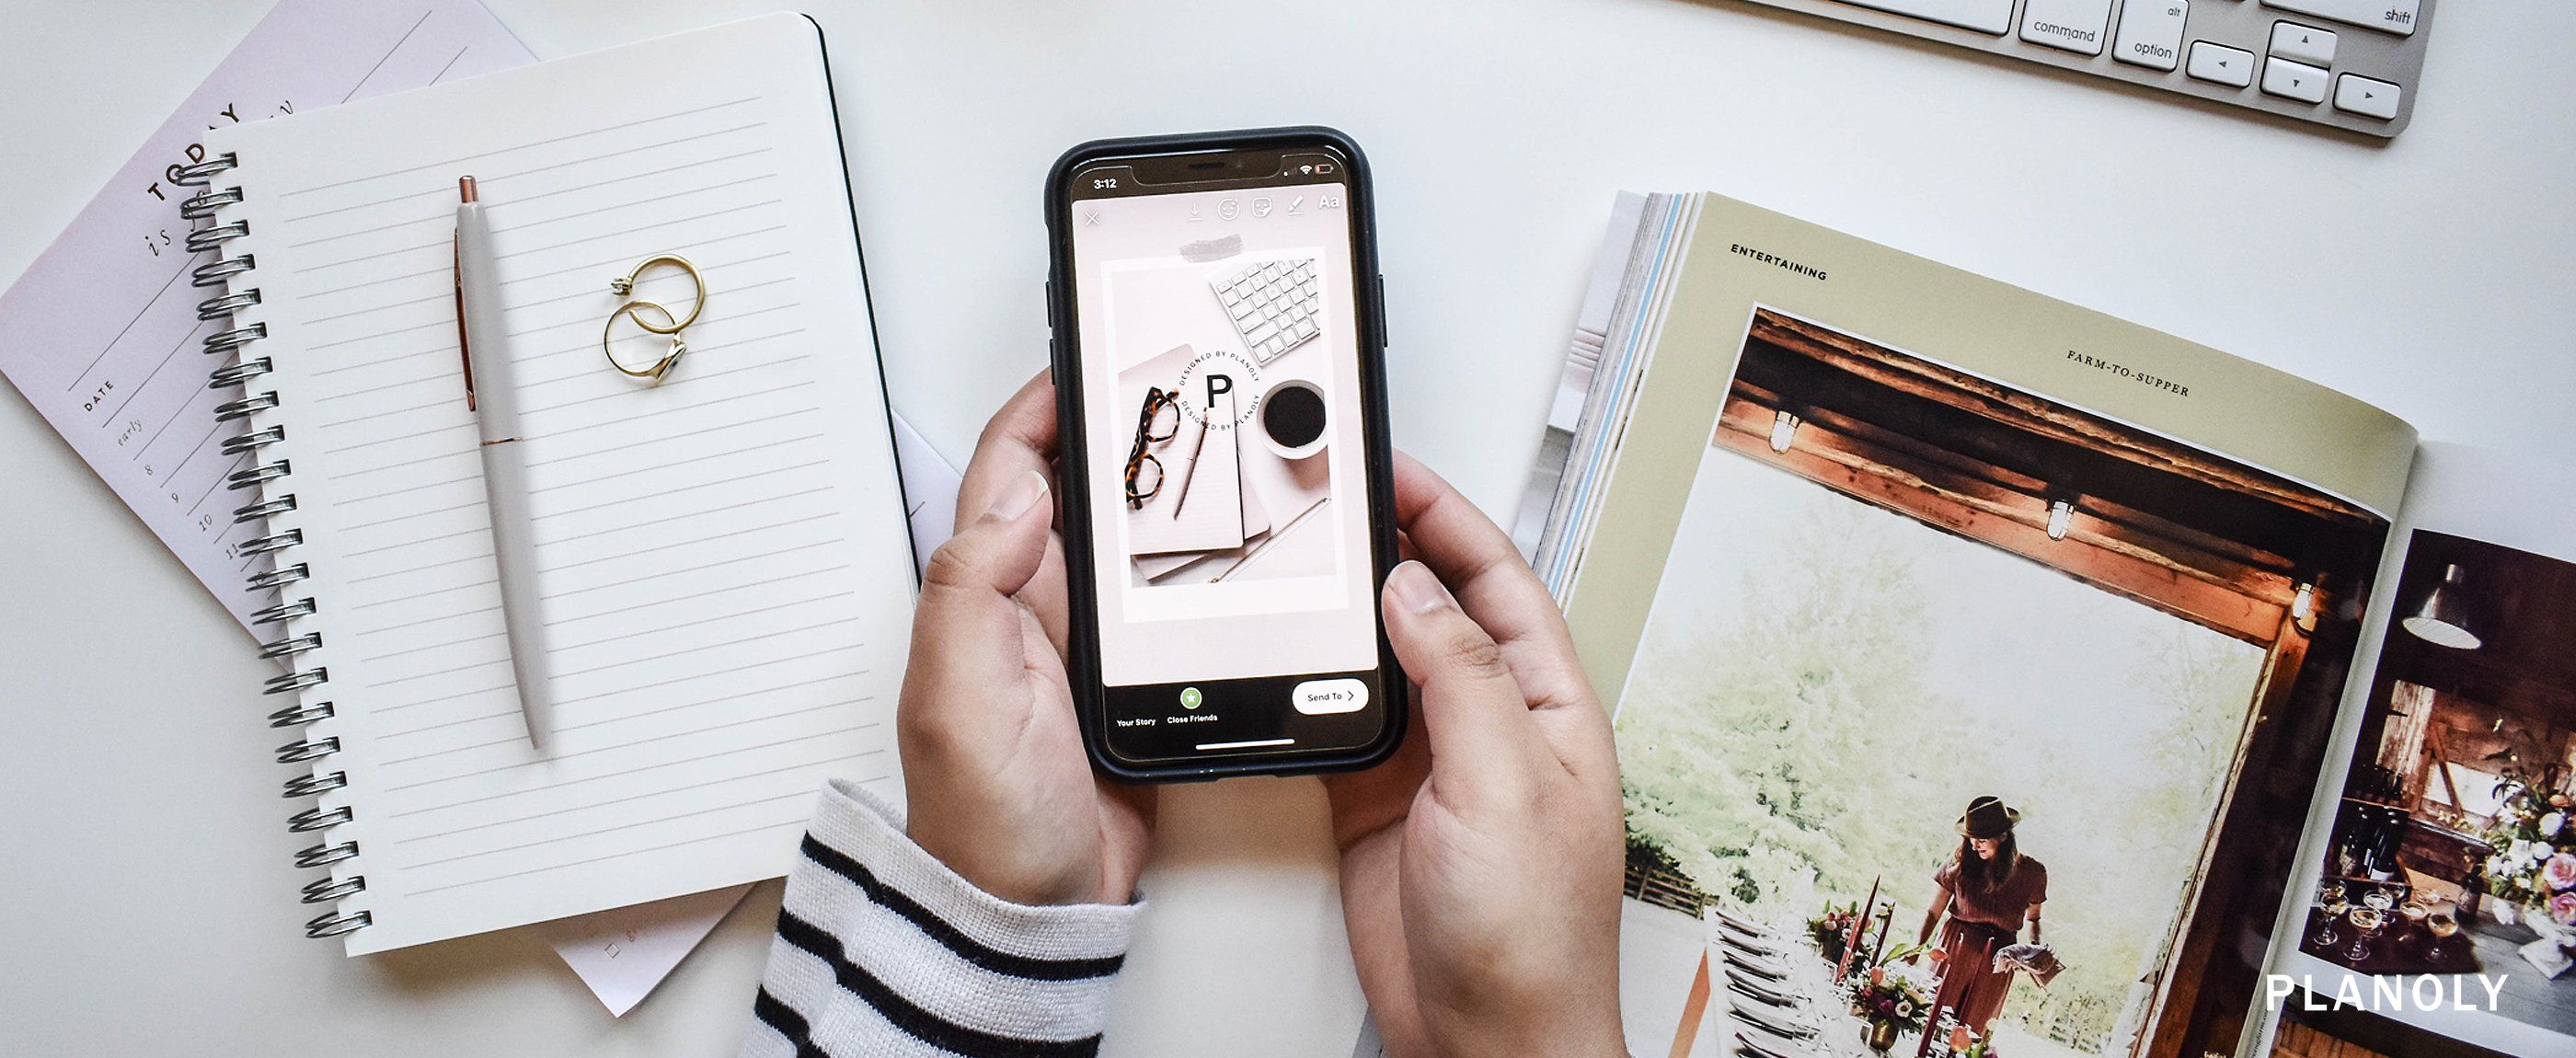 How to Maximize Engagement Through Instagram Stories